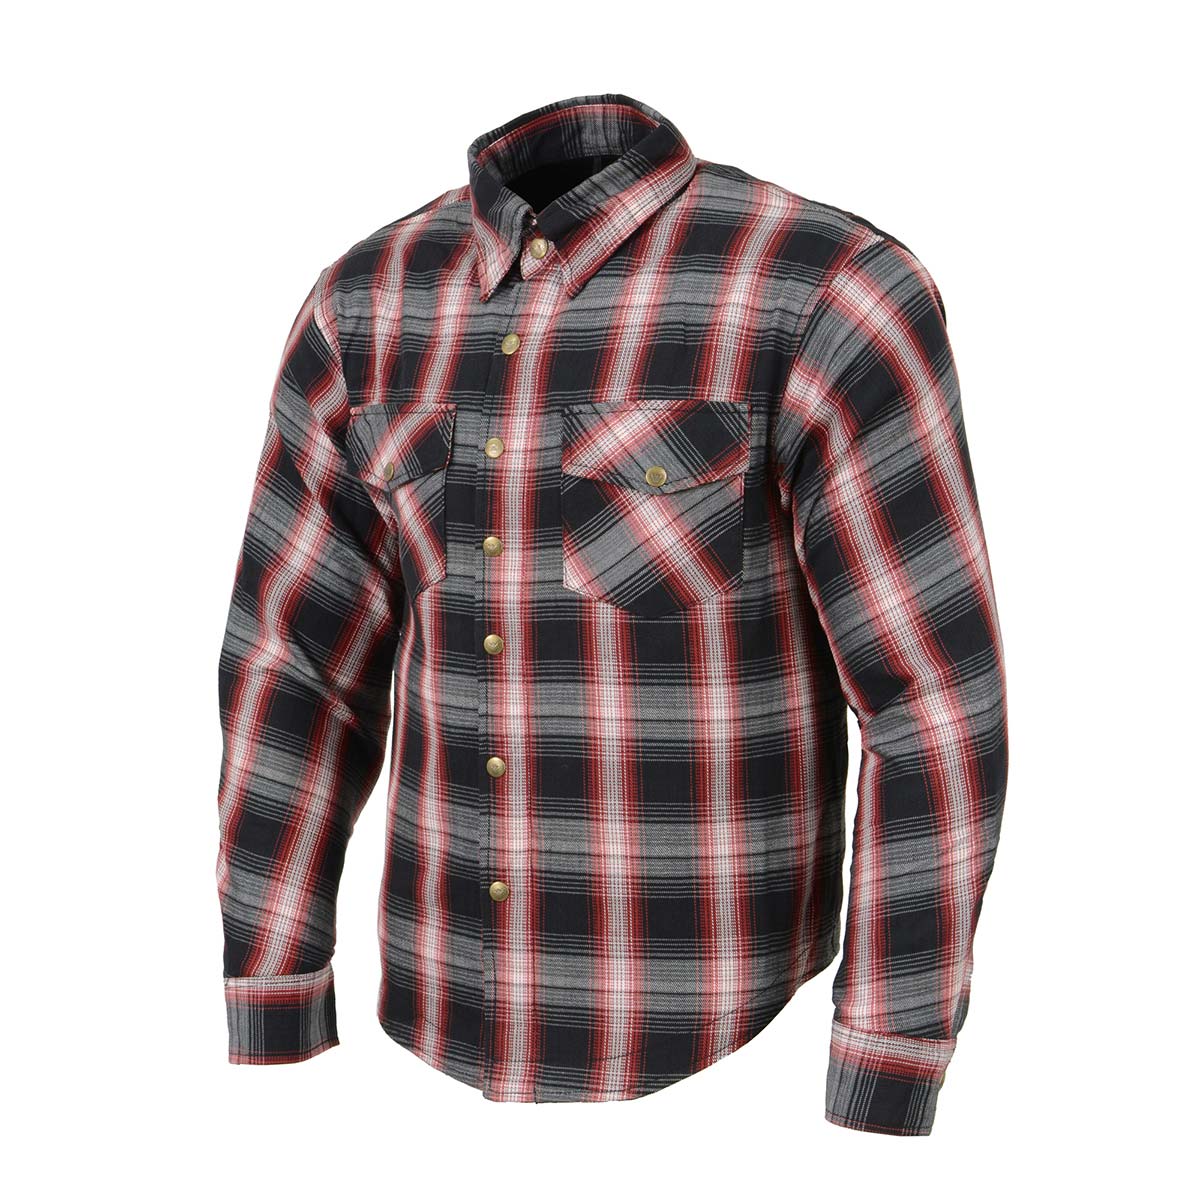 Milwaukee Leather MPM1653 Men's Plaid Flannel Biker Shirt with CE Approved Armor - Reinforced w/ Aramid Fibers